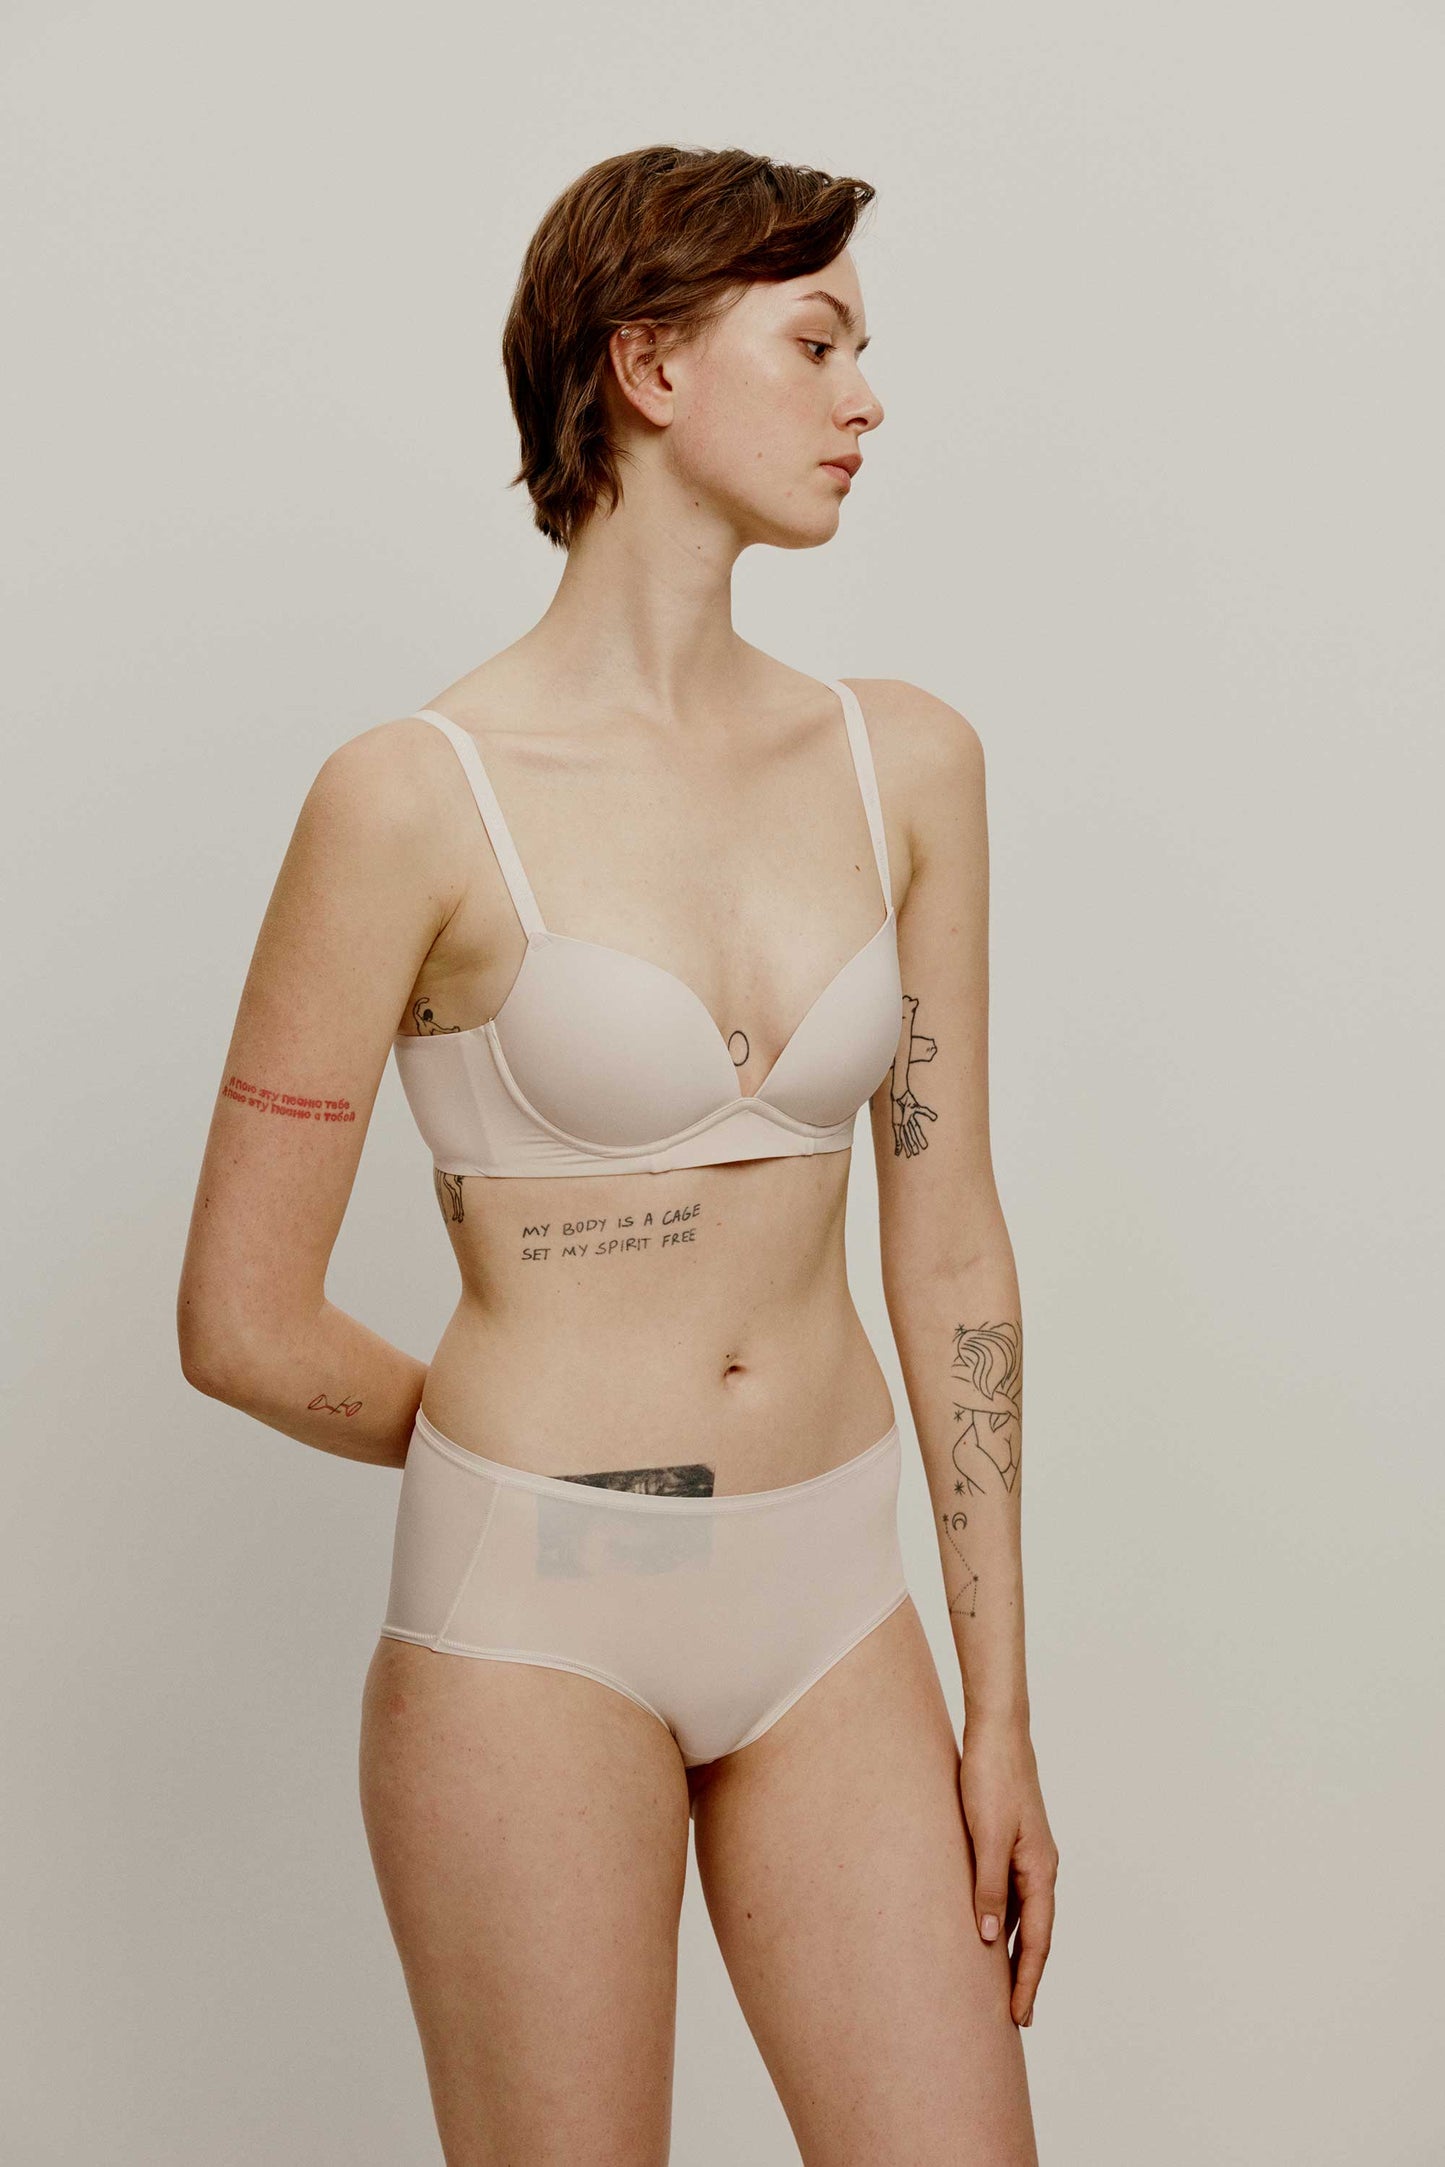 woman in bra and brief